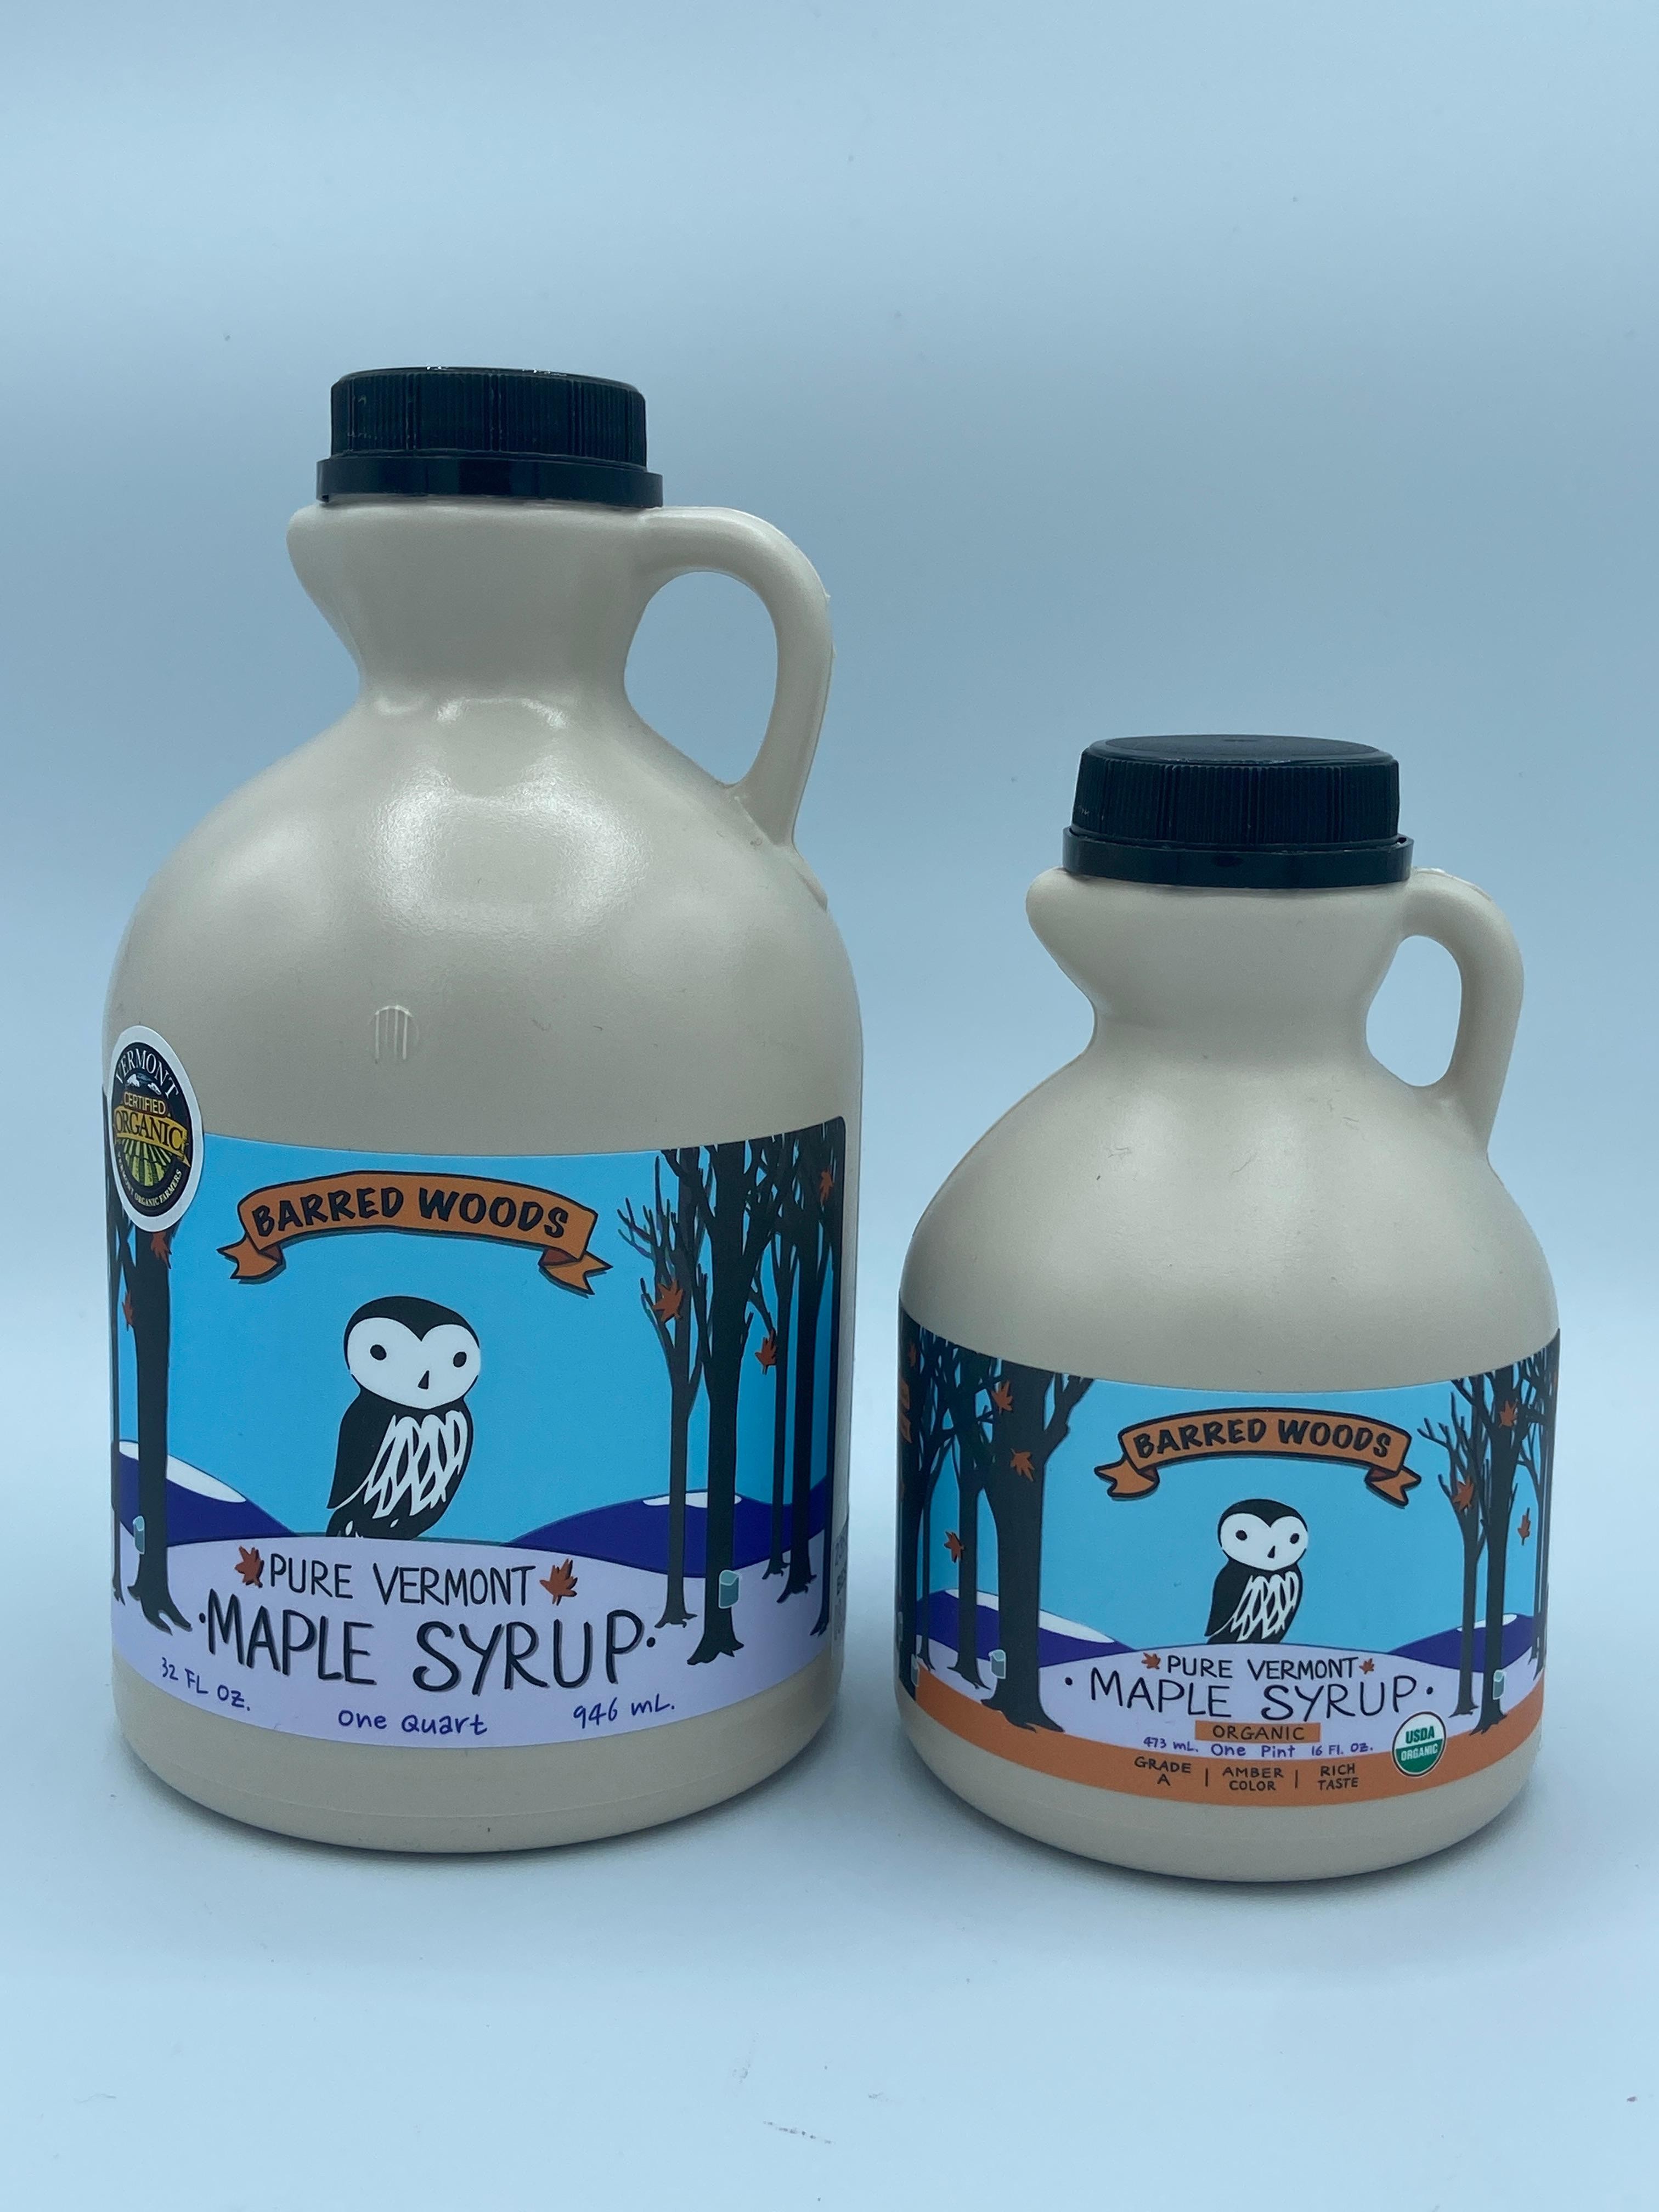 Barred Woods Maple Syrup